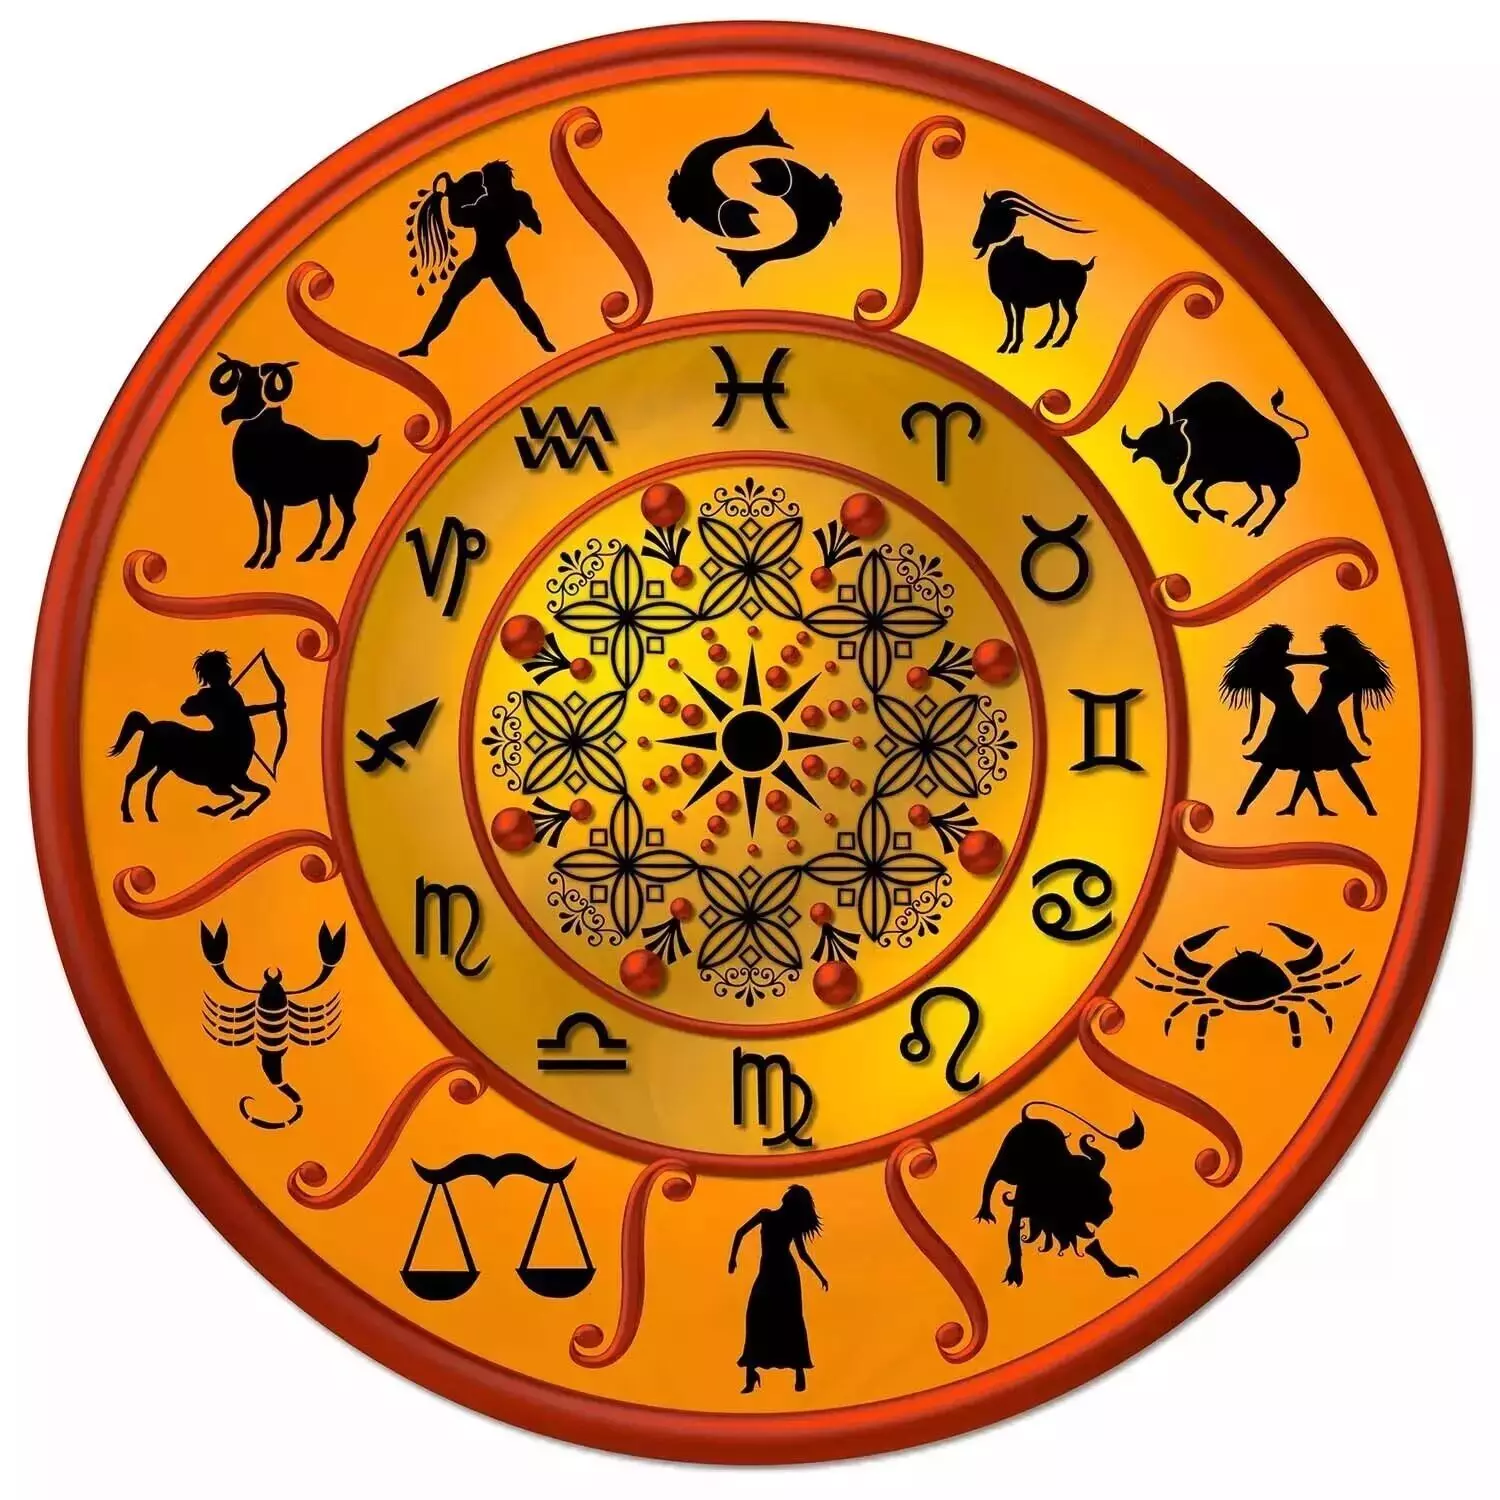 21 August  – Know your todays horoscope